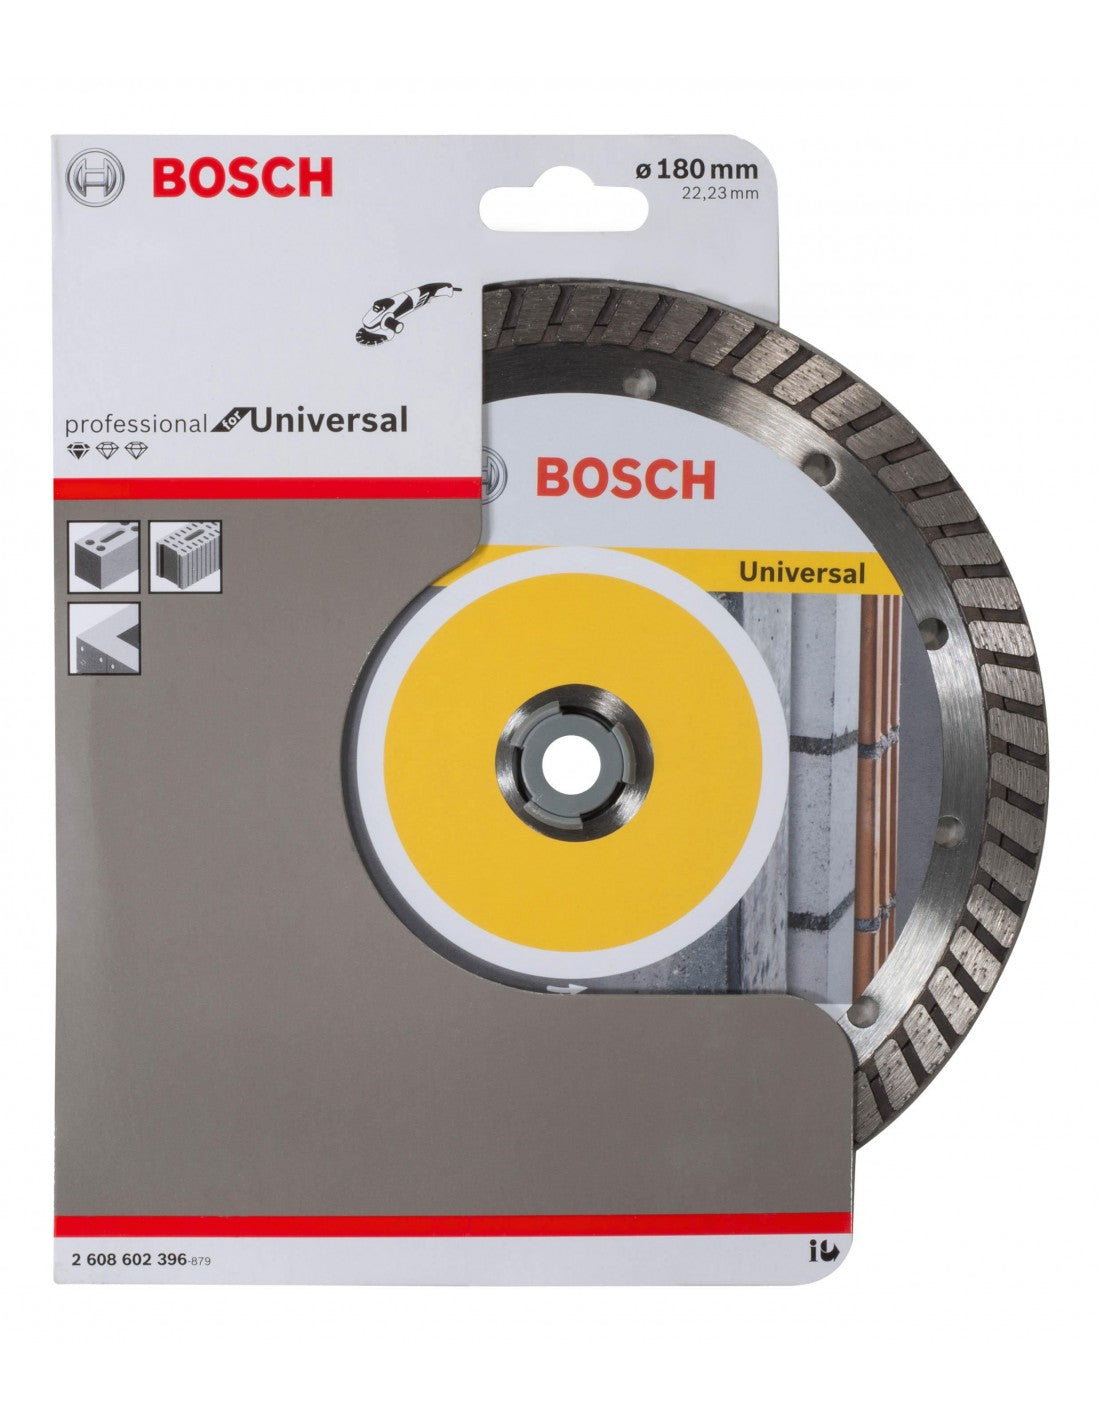 Bosch Standard for Universal Turbo 180 x 22,23 x 2,5 x 10, continuous rim 2608602396 Power Tool Services